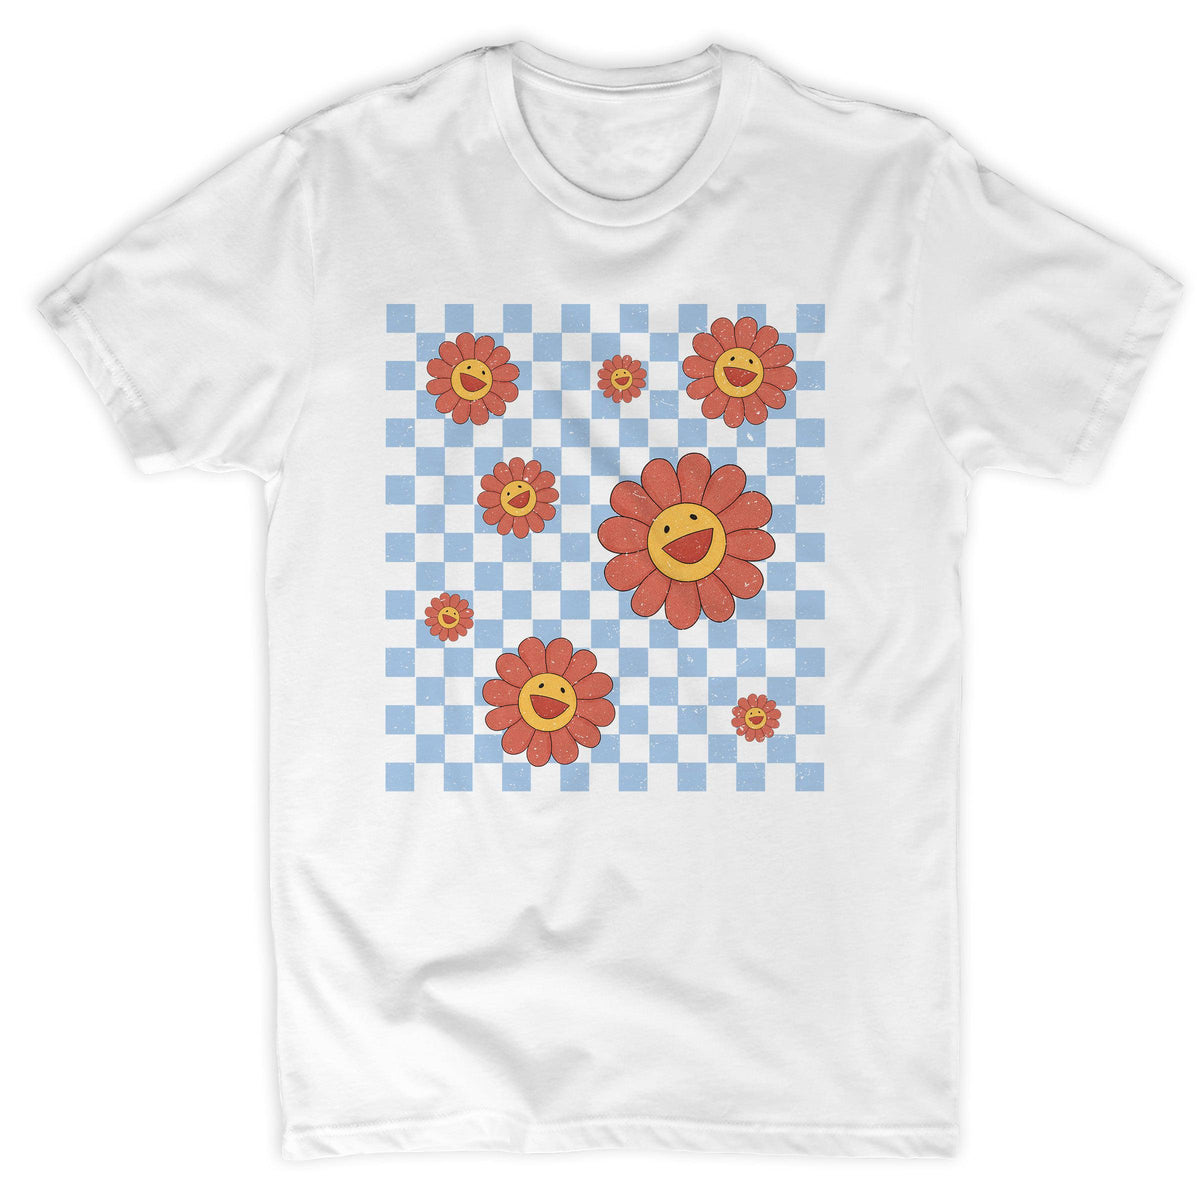 Checkered Smiling Daisies Tee